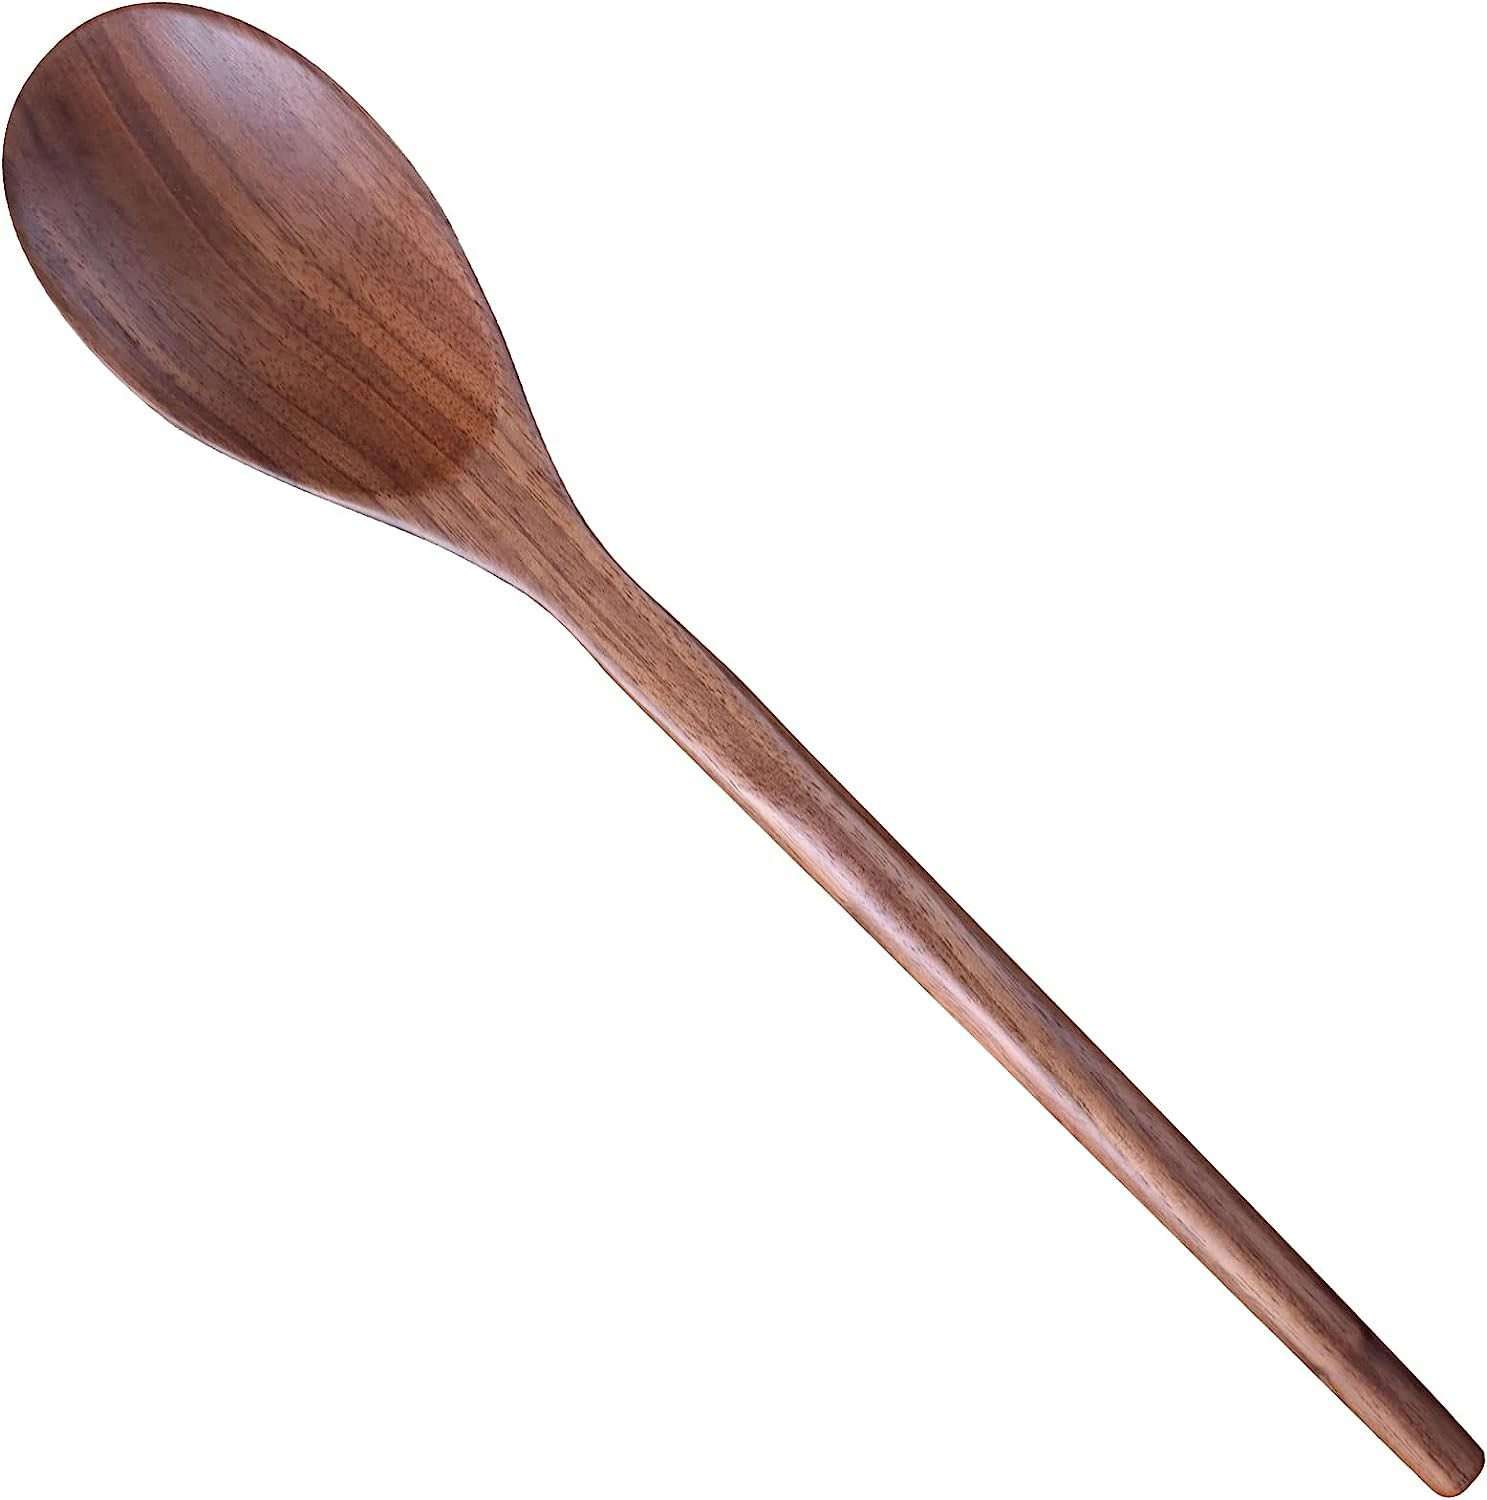 Wooden Spoon for Cooking | Walnut Wood Mixing Spoon for Soup Stirring | Nonstick Kitchen Serving Spoons | Scooper Utensil with Long Comfortable Handle | Smooth Finish Tableware